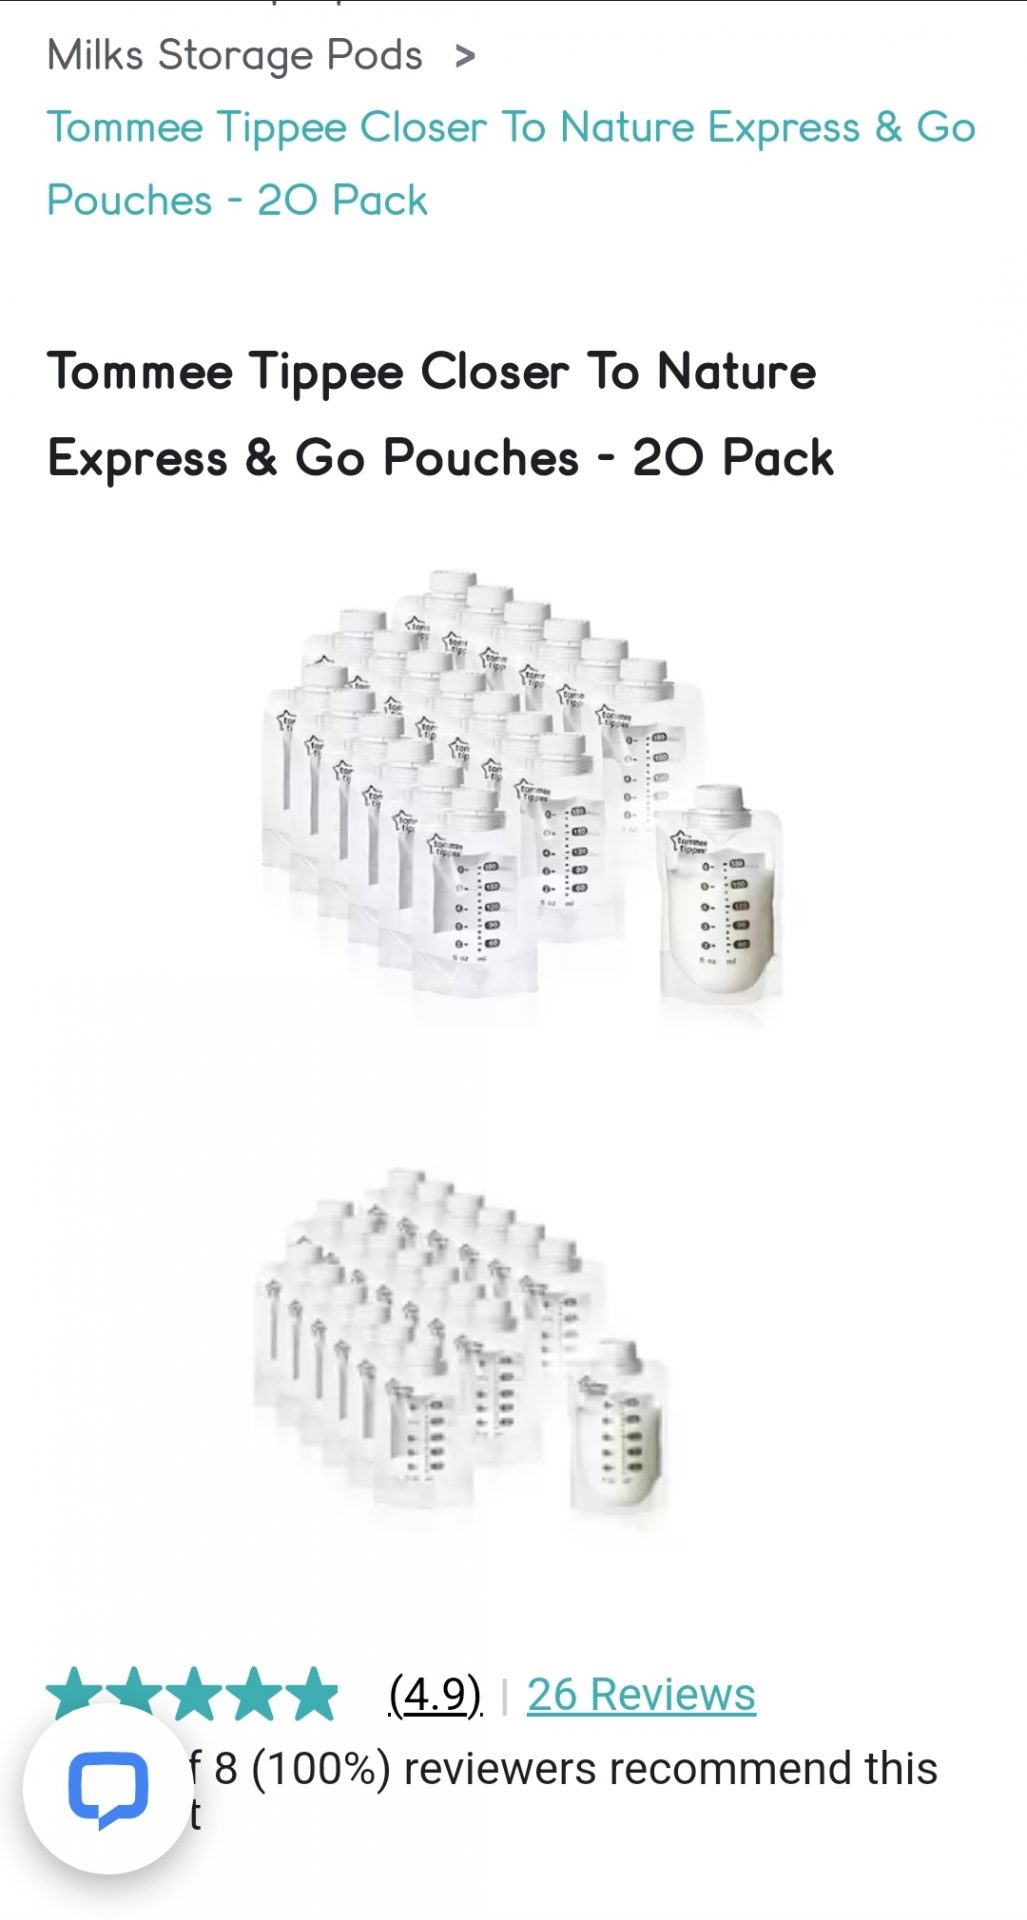 Express and Go Pouches